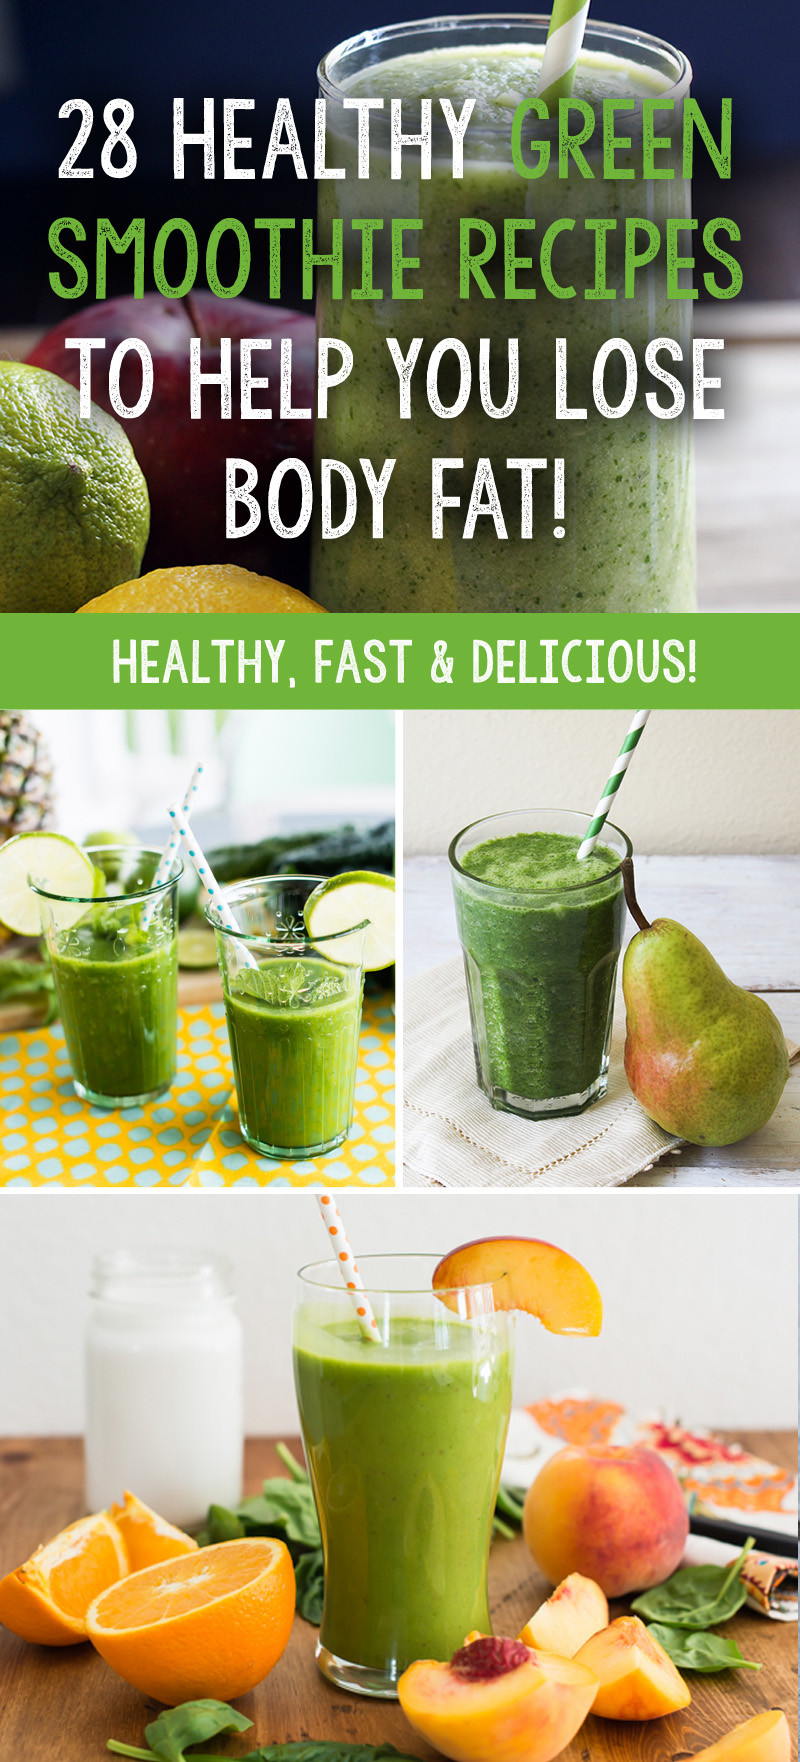 Healthy Green Smoothie Recipes
 28 Healthy Green Smoothie Recipes To Help You Lose Body Fat